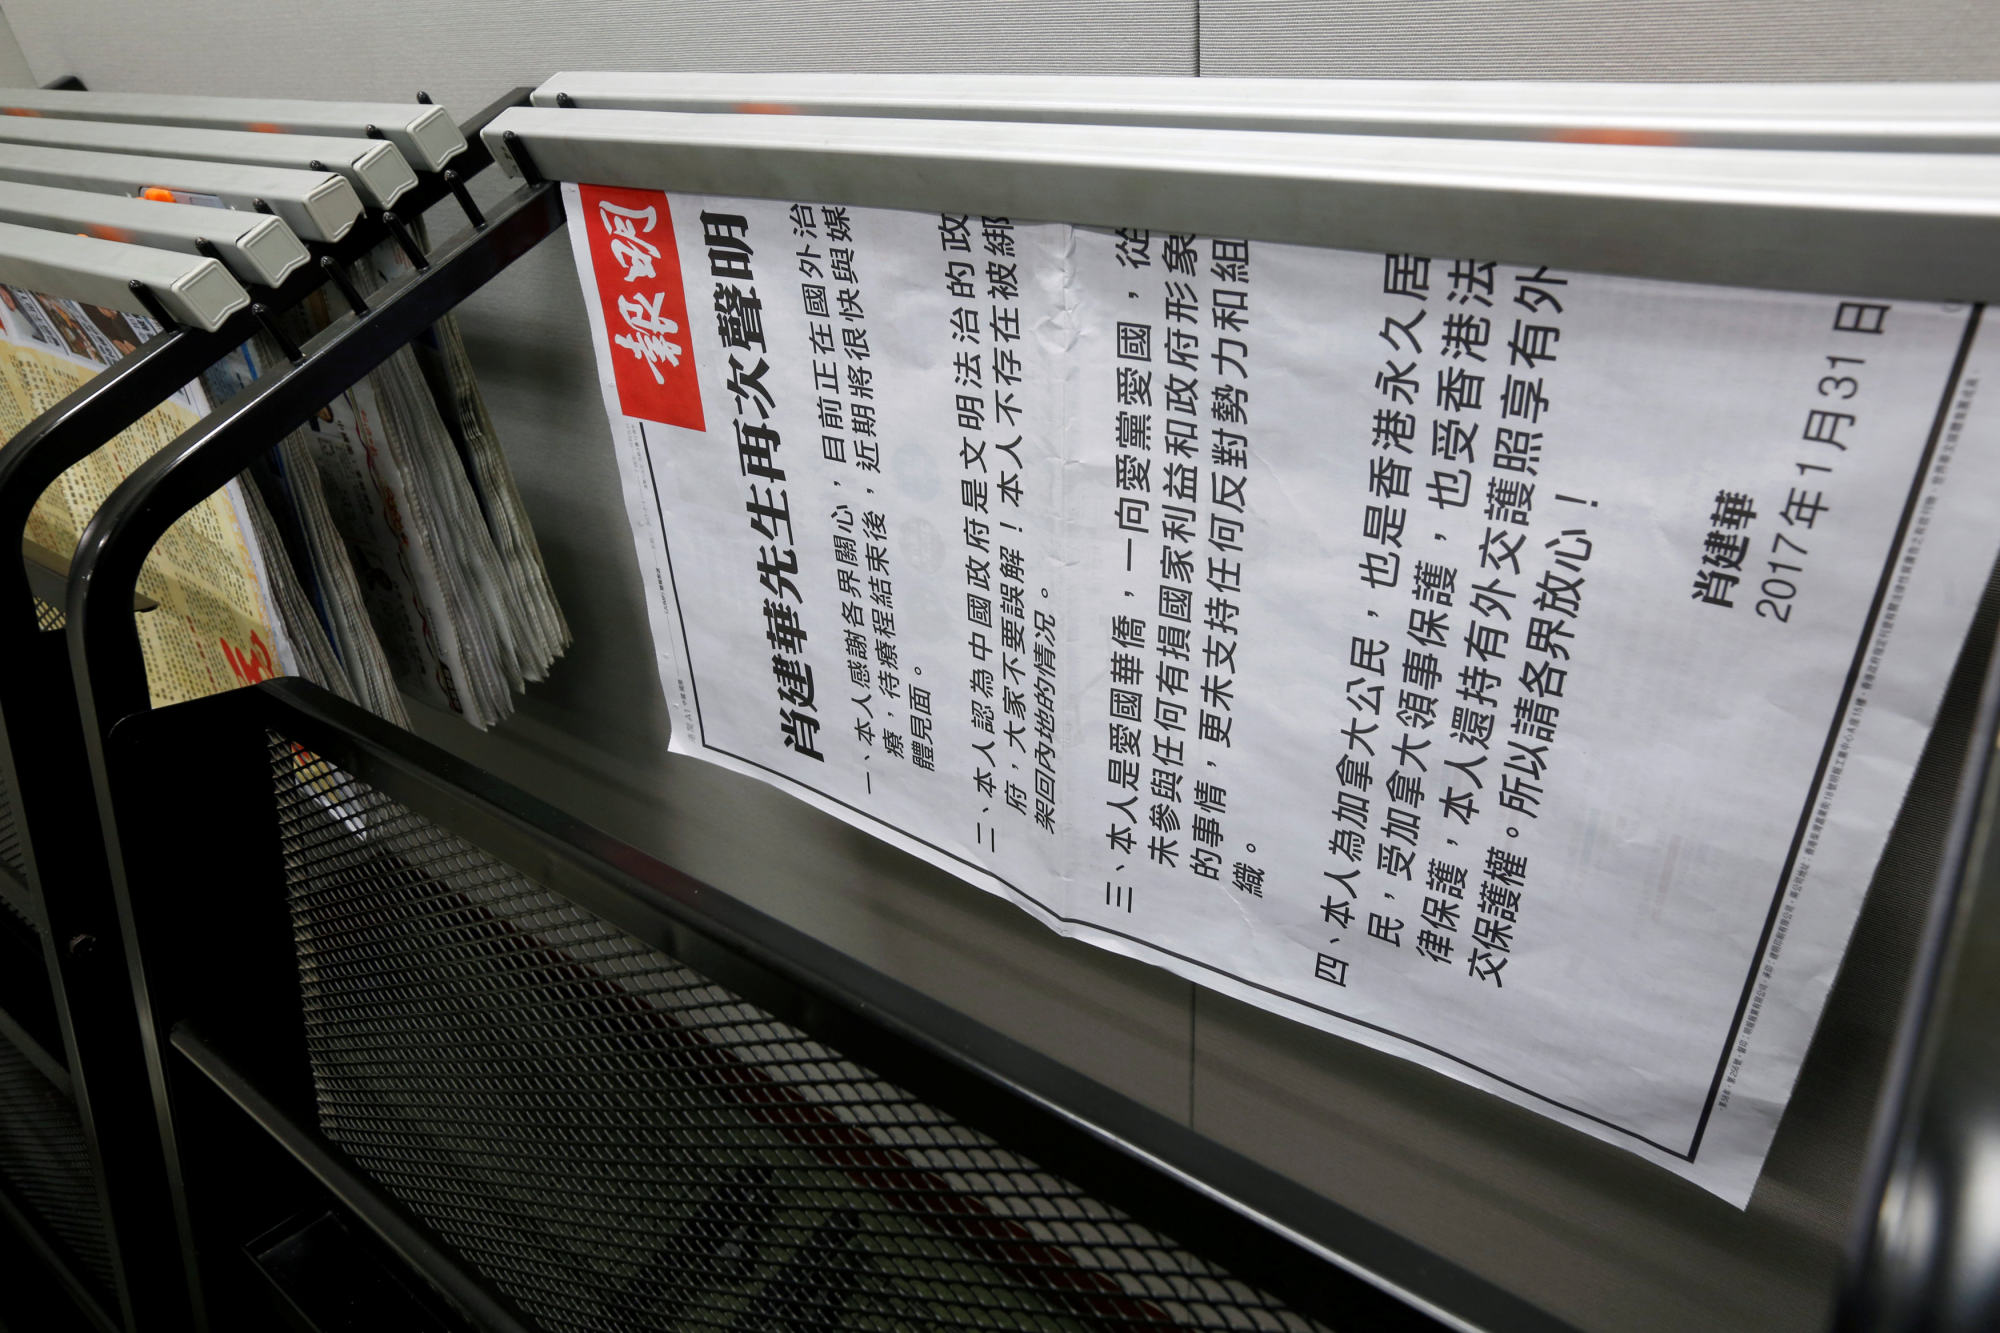 A statement from Xiao Jianhua is printed on the front page of Ming Pao newspaper in Hong Kong, on February 1, 2017. Photo: Reuters